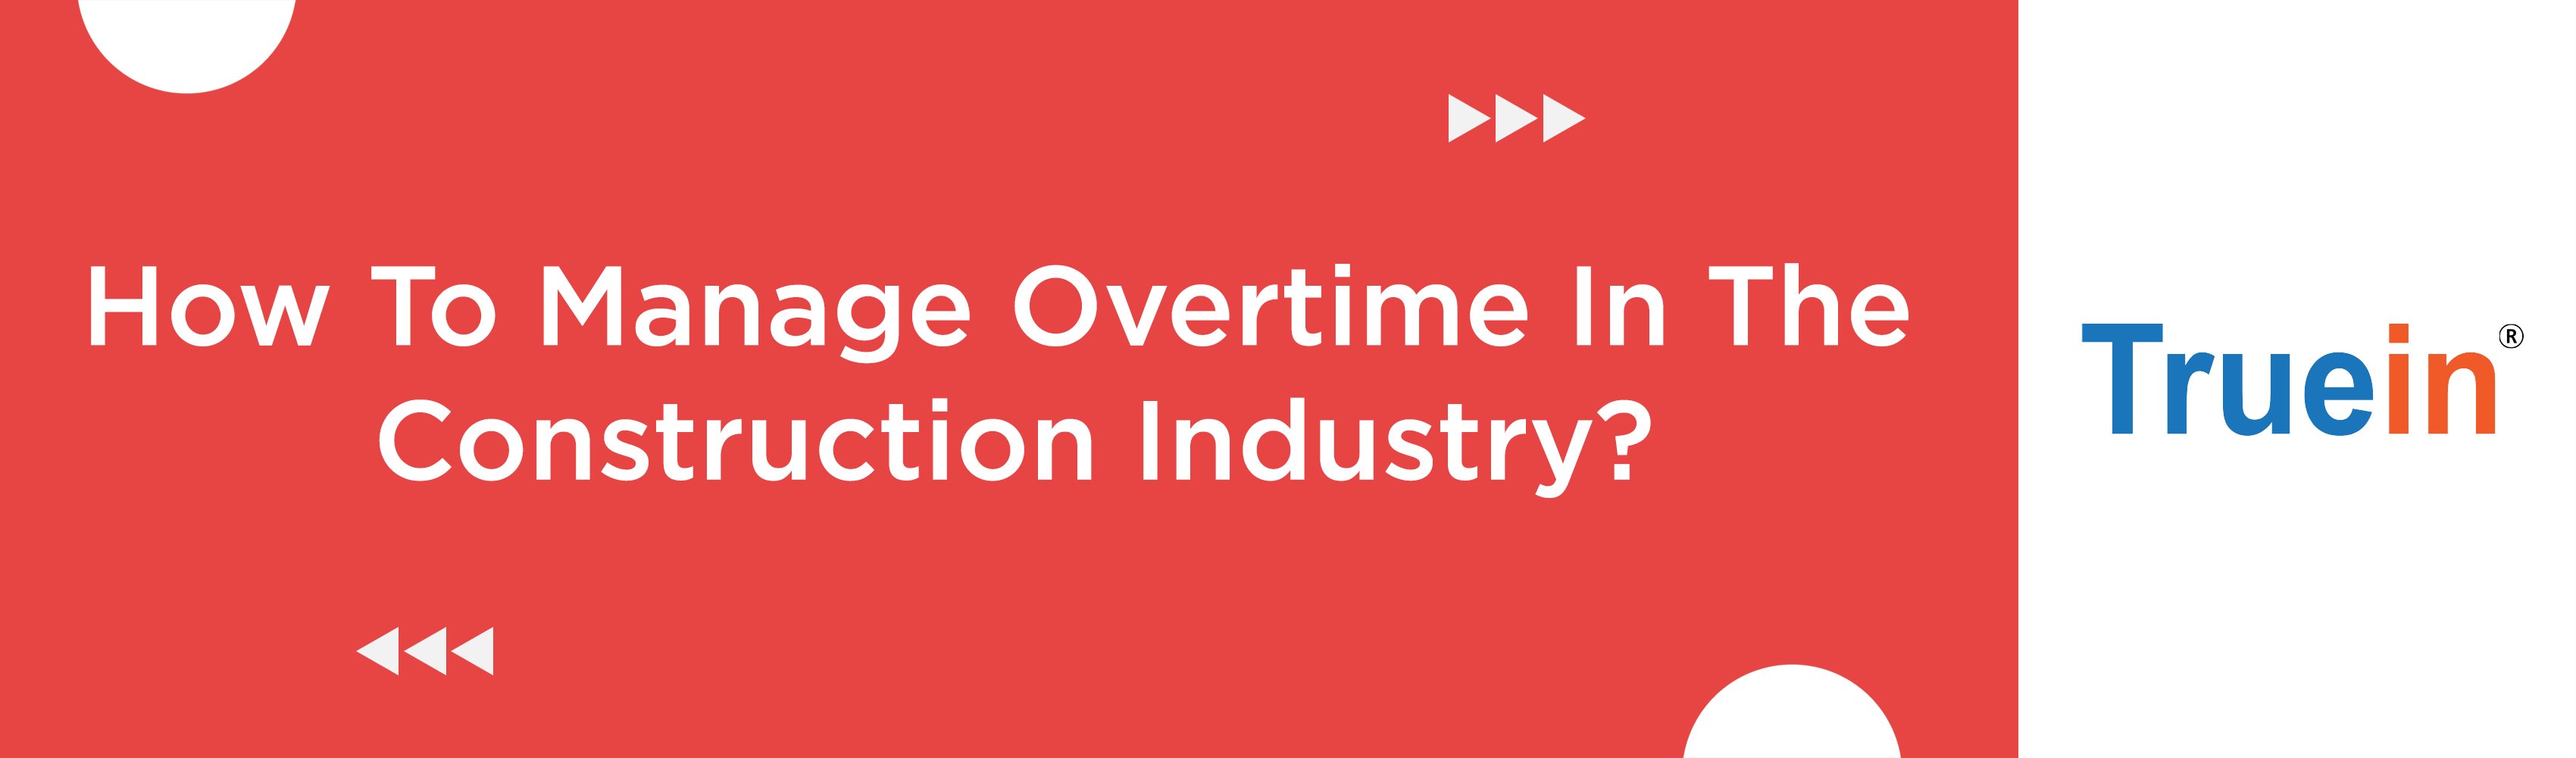 How To Manage Overtime In The Construction Industry?